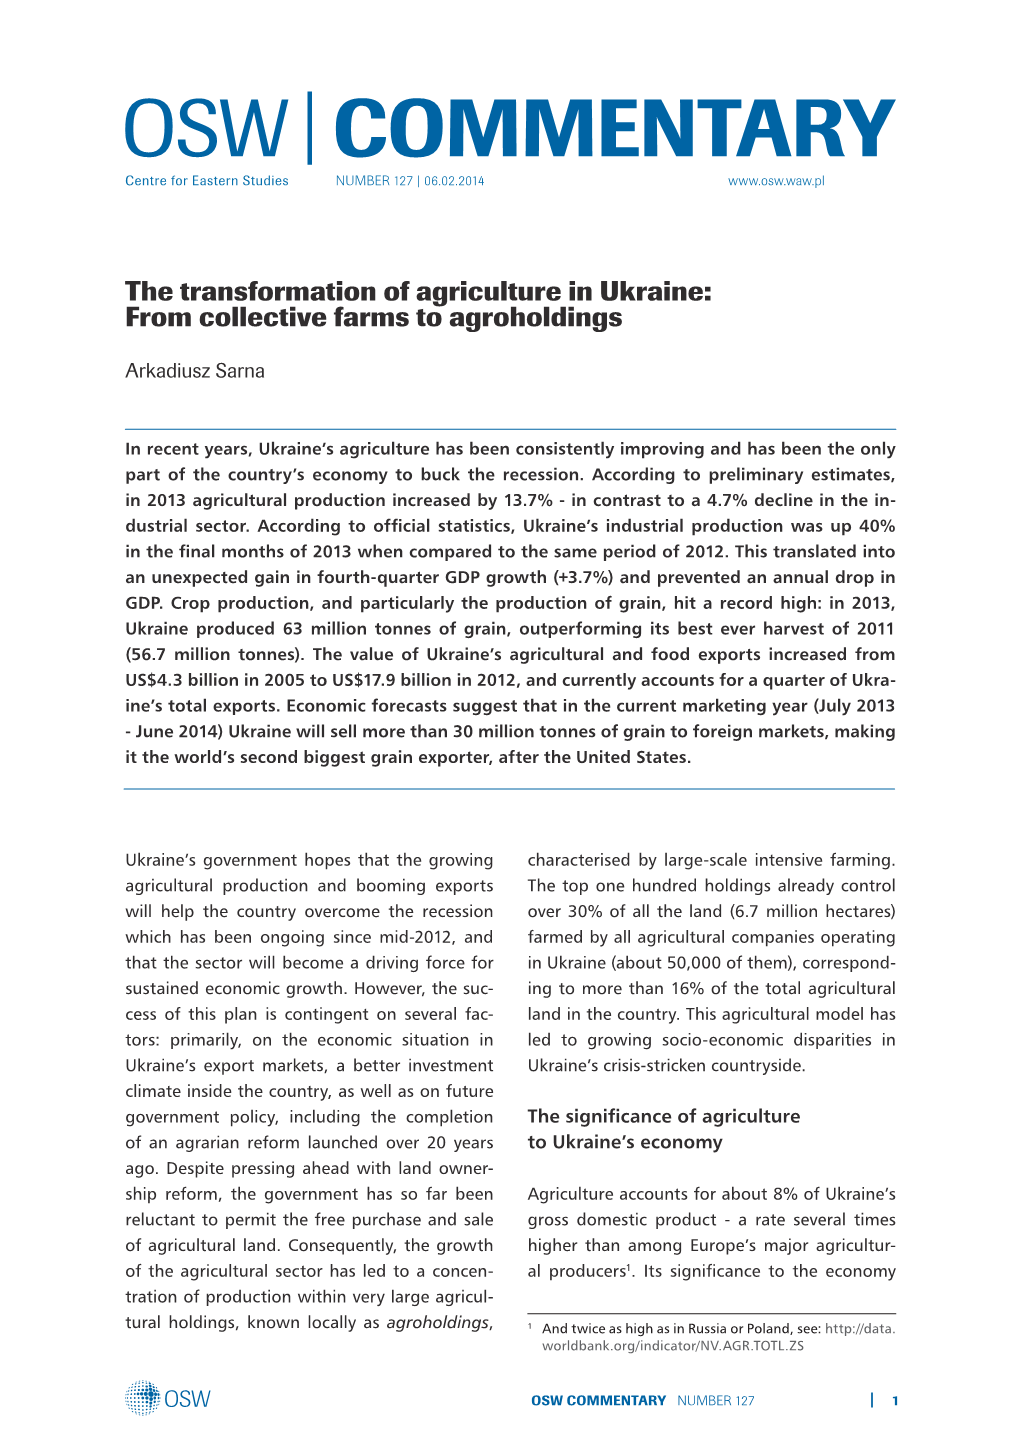 The Transformation of Agriculture in Ukraine: from Collective Farms to Agroholdings